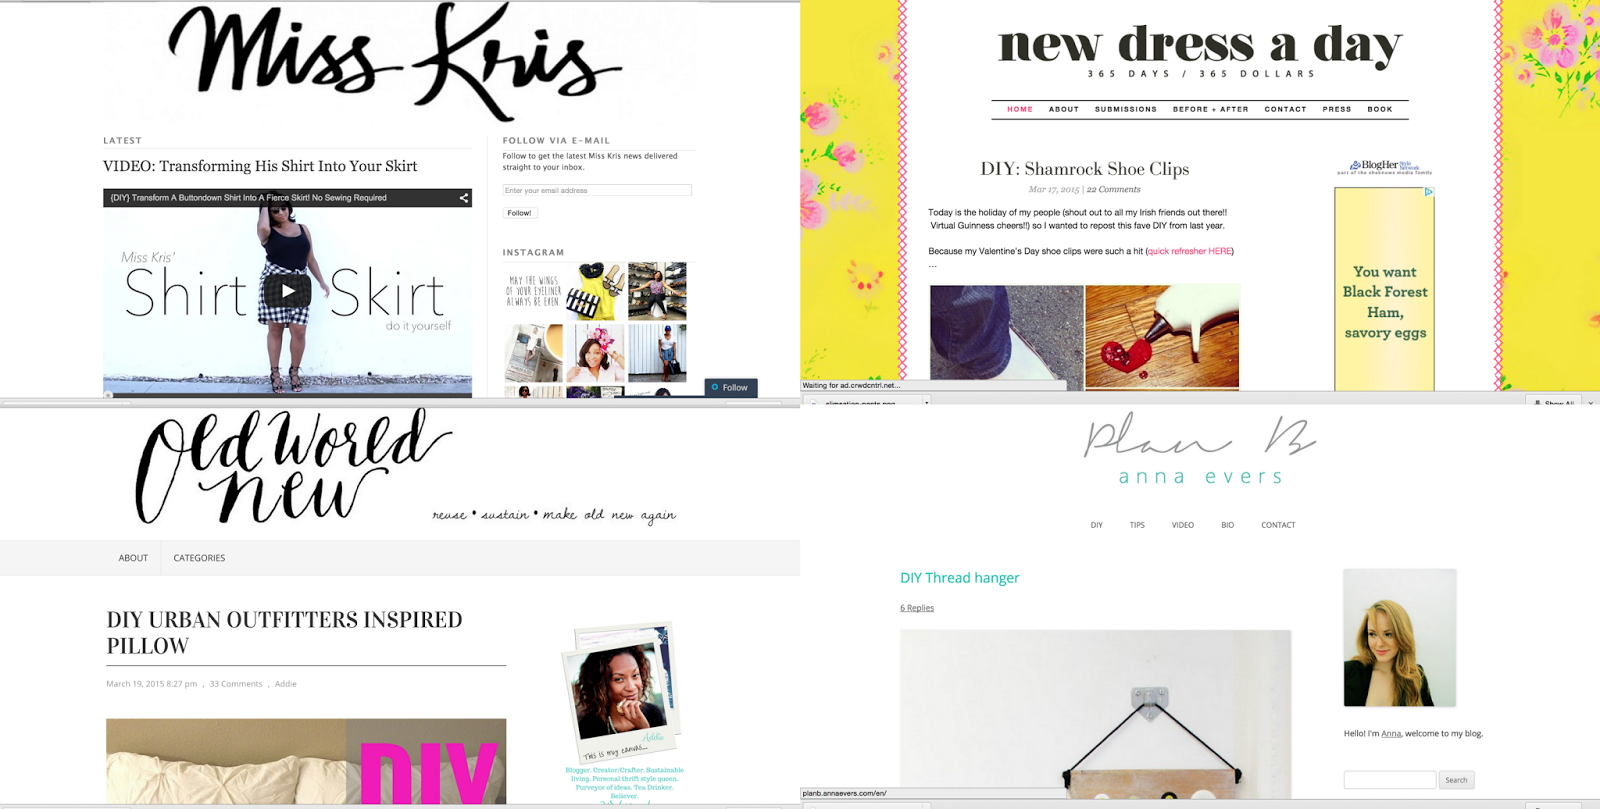 refashion bloggers miss kris turner, new dress a day, old world new, plan b anna evers